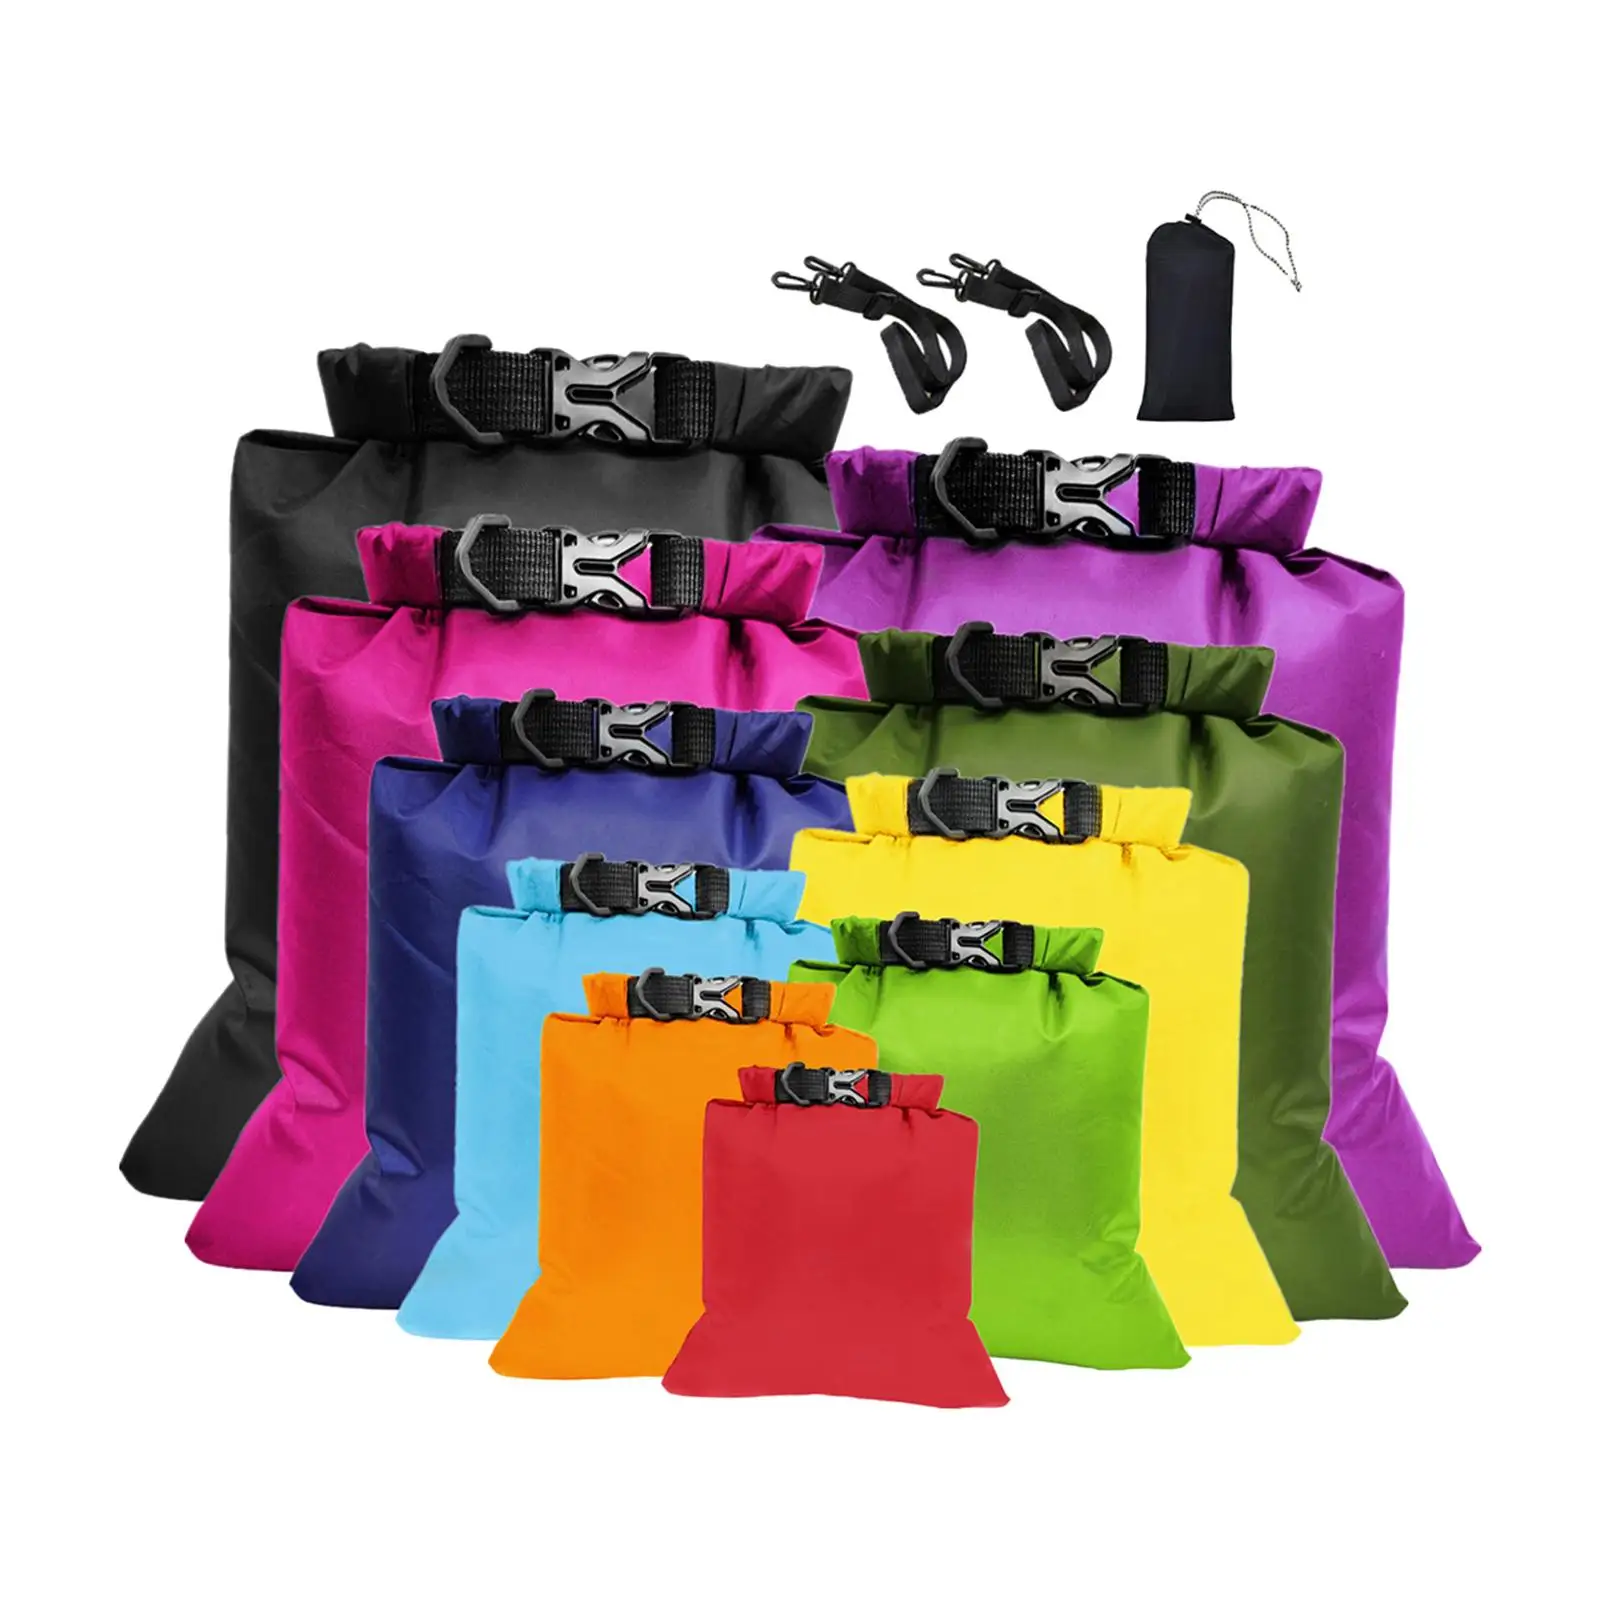 10x Floating Waterproof Bags Lightweight Heavy Duty Roll Top Floating Bag for Kayaking for Surfing Swimming Kayak Hiking Boating